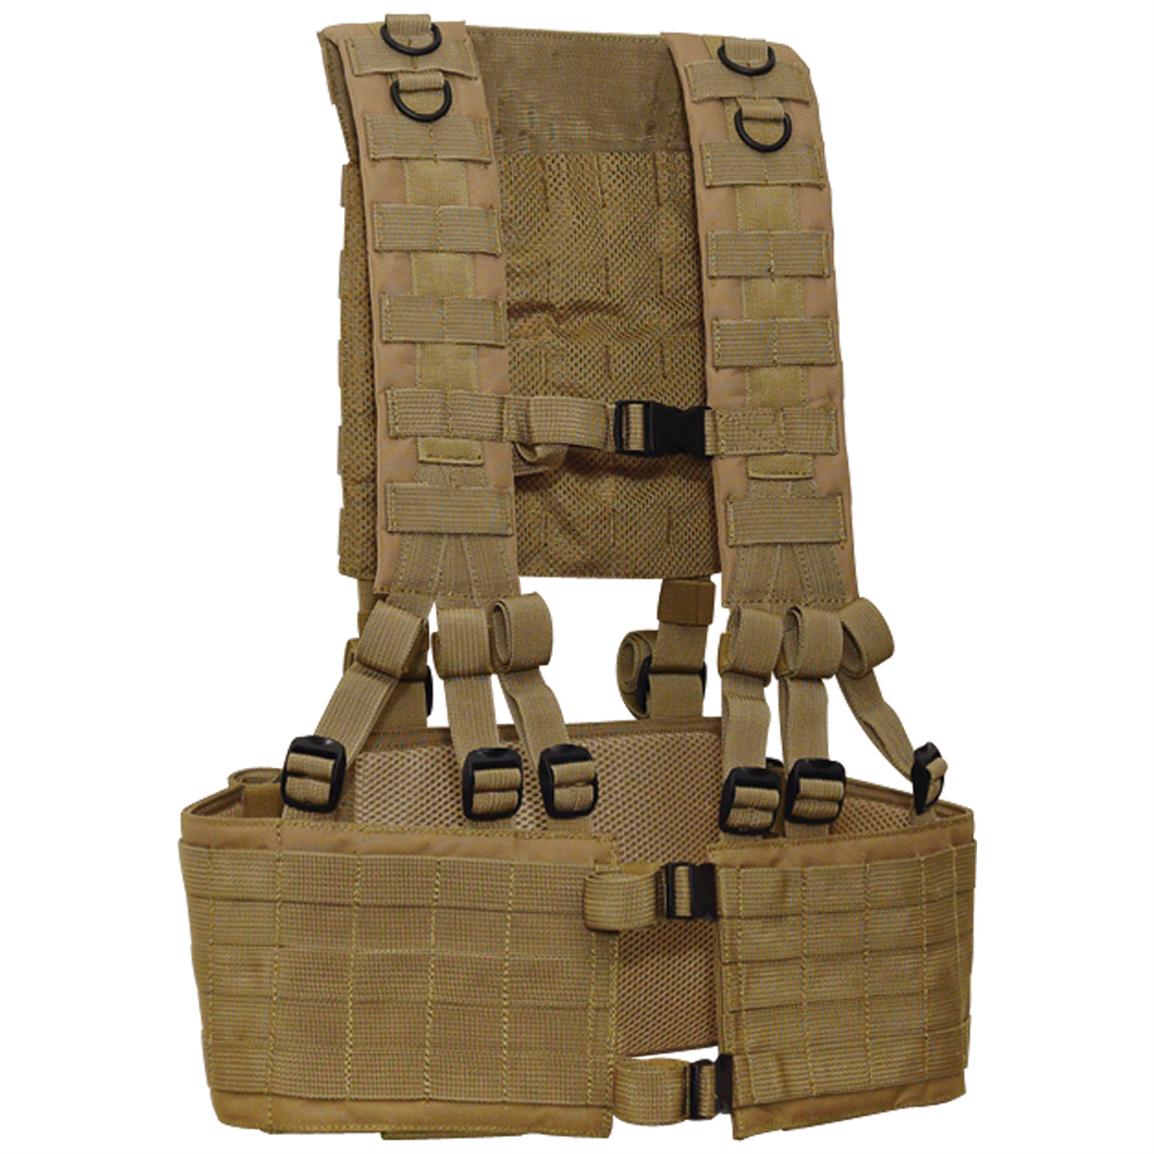 MOLLE Universal LBE Harness - 131420, Tactical Gear at Sportsman's Guide